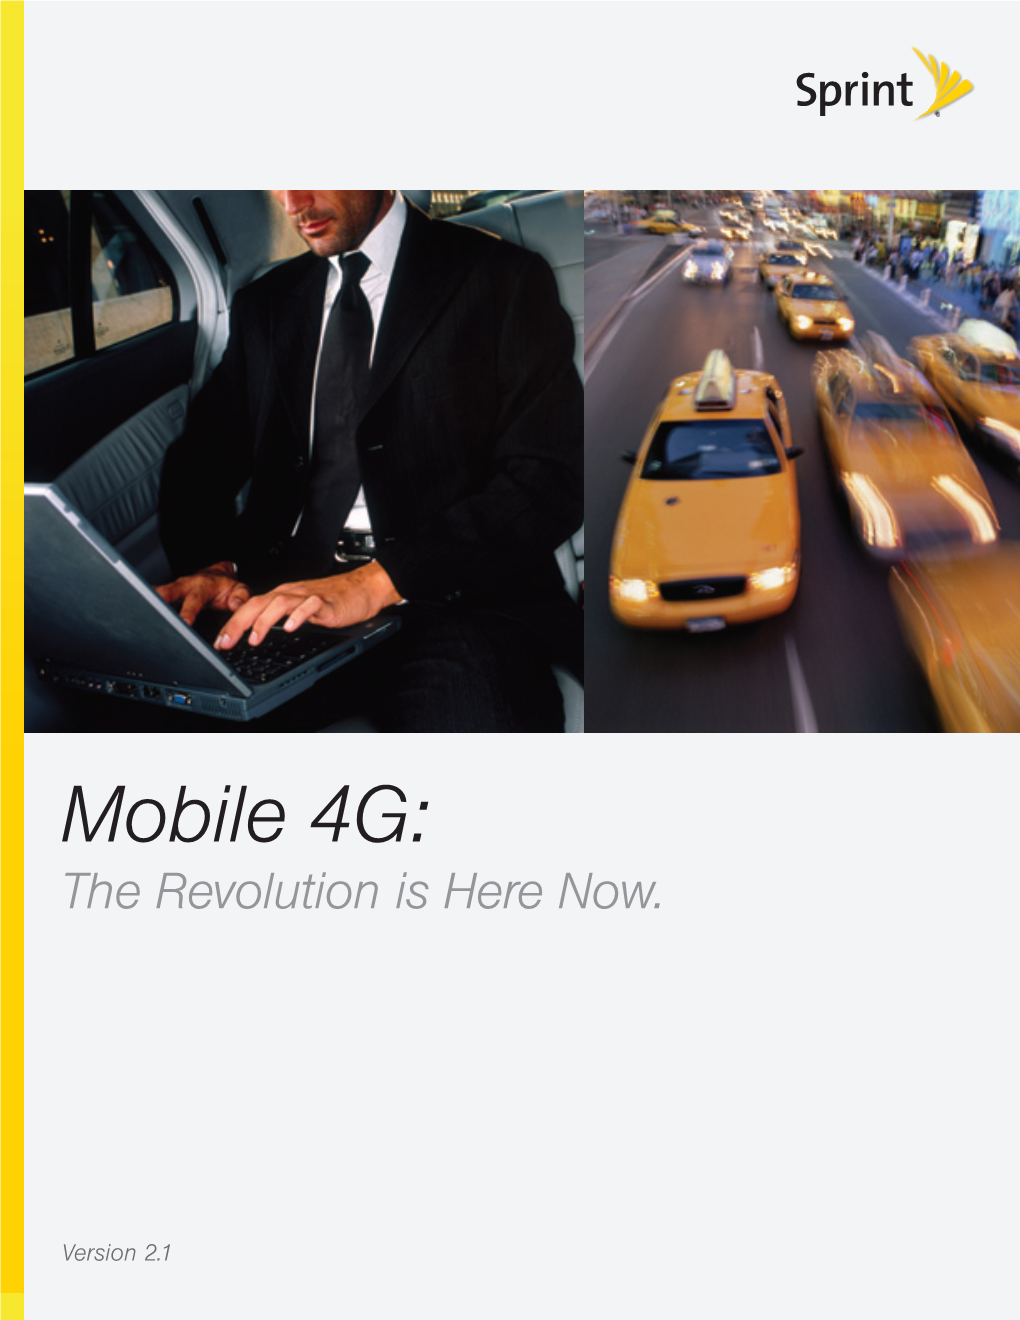 Mobile 4G: the Revolution Is Here Now